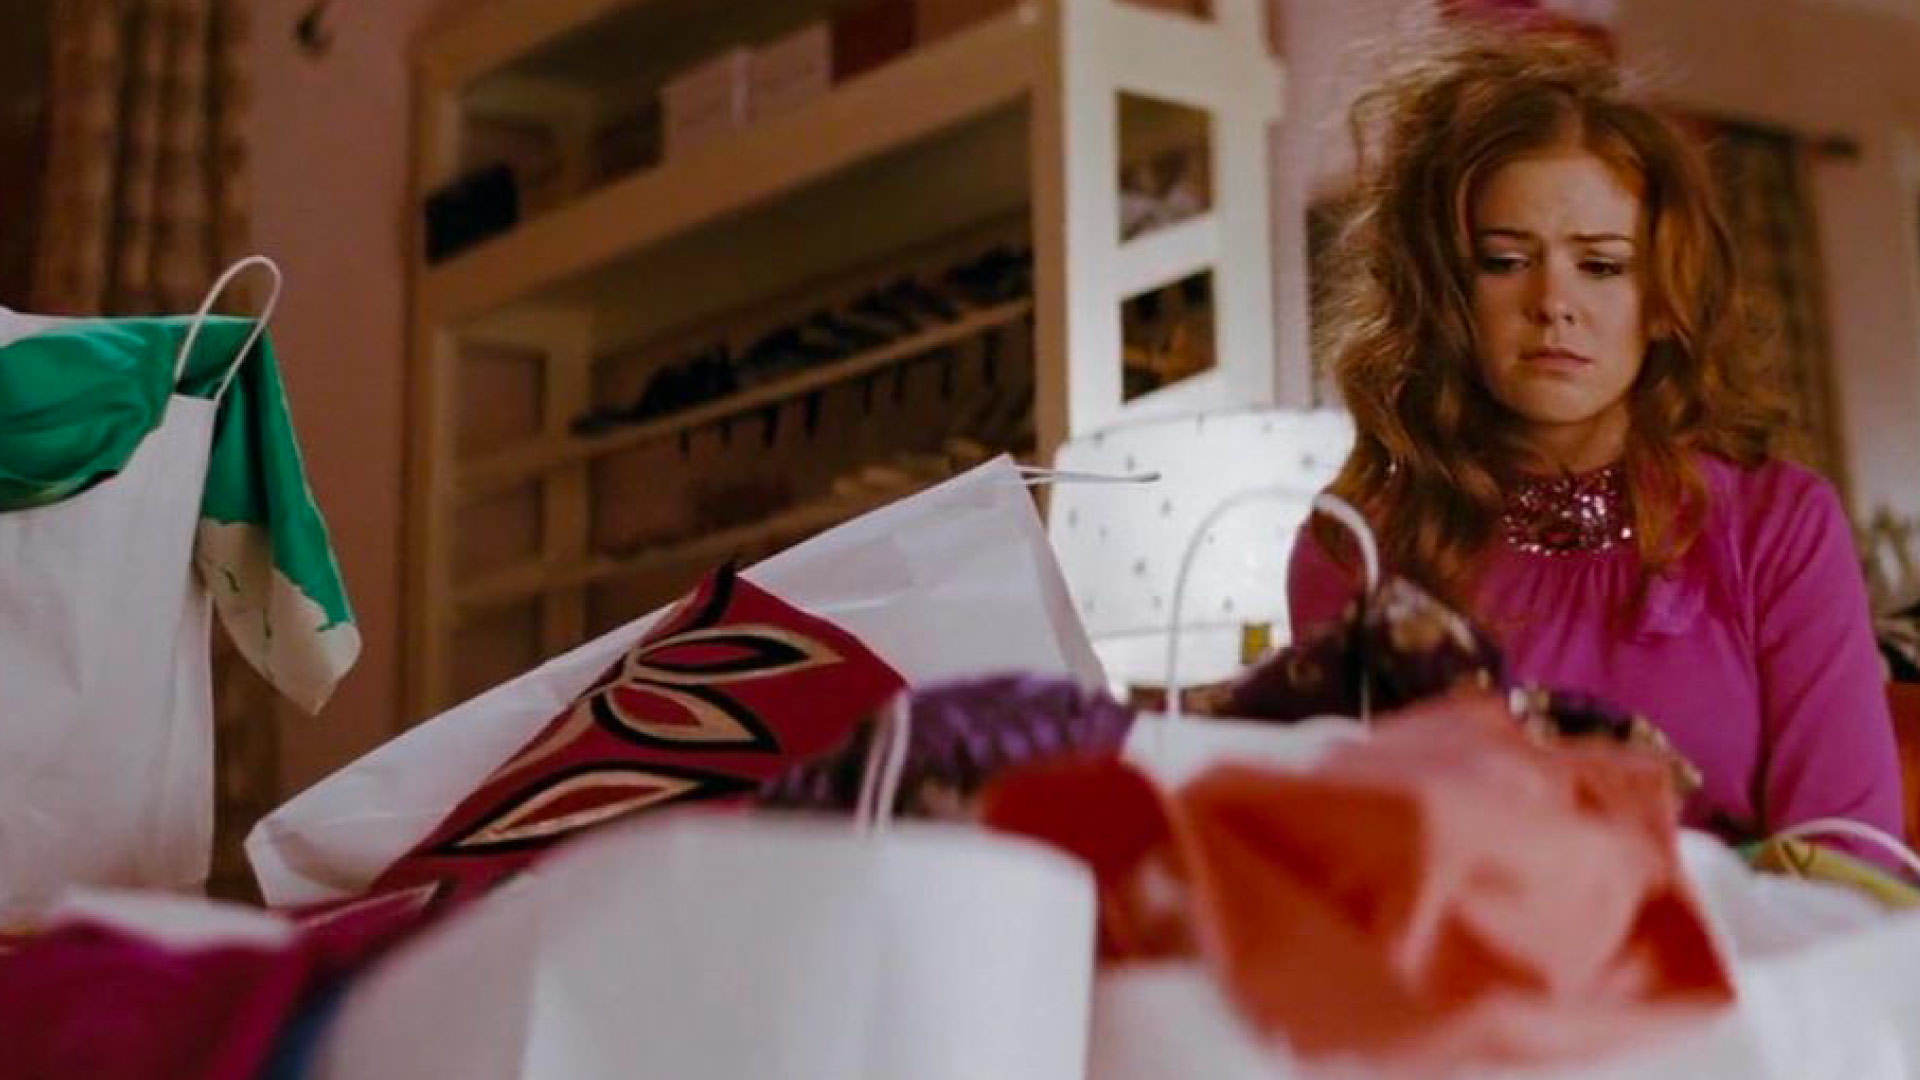 isla fisher with lots of shopping bags in &quot;confessions of a shopaholic&quot;